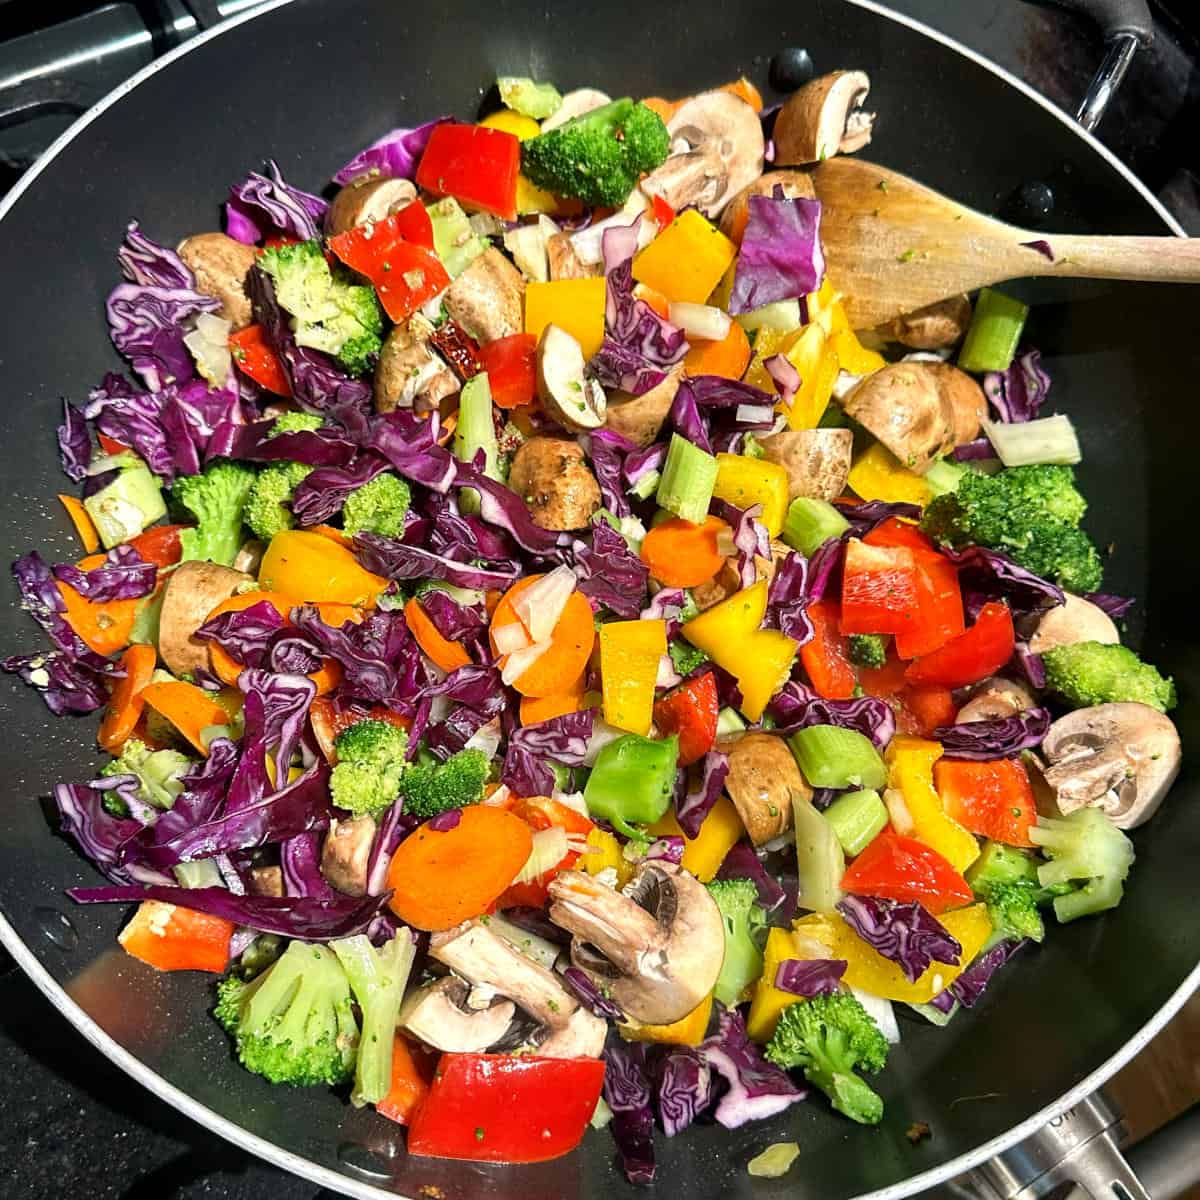 Vegetables added to the wok.